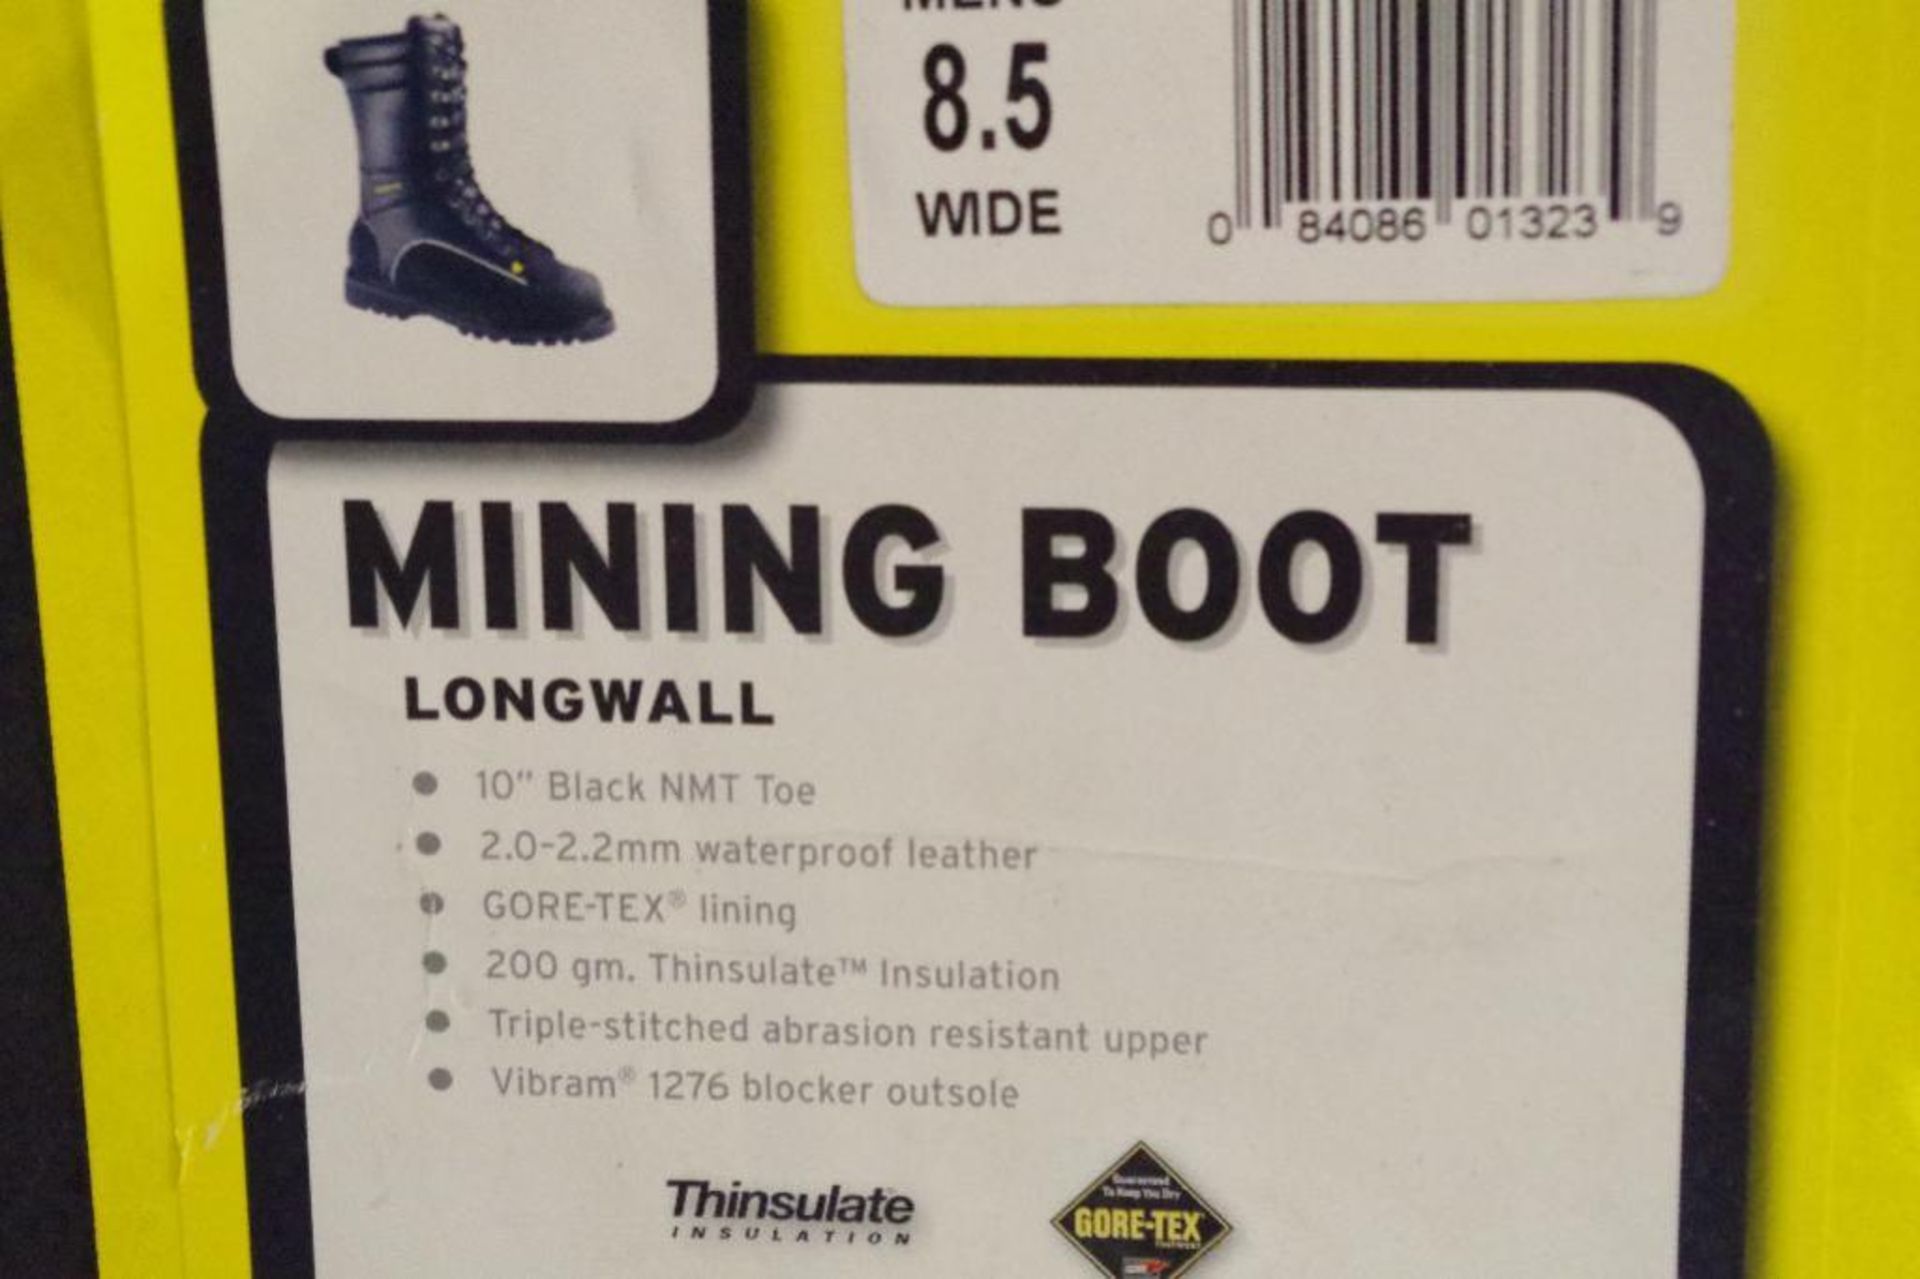 NEW LACROSS 10"H Men's Black Miner Boots, Composite Toe, Leather Upper, Size 8-1/2 M/N 00552090-8.5W - Image 3 of 3